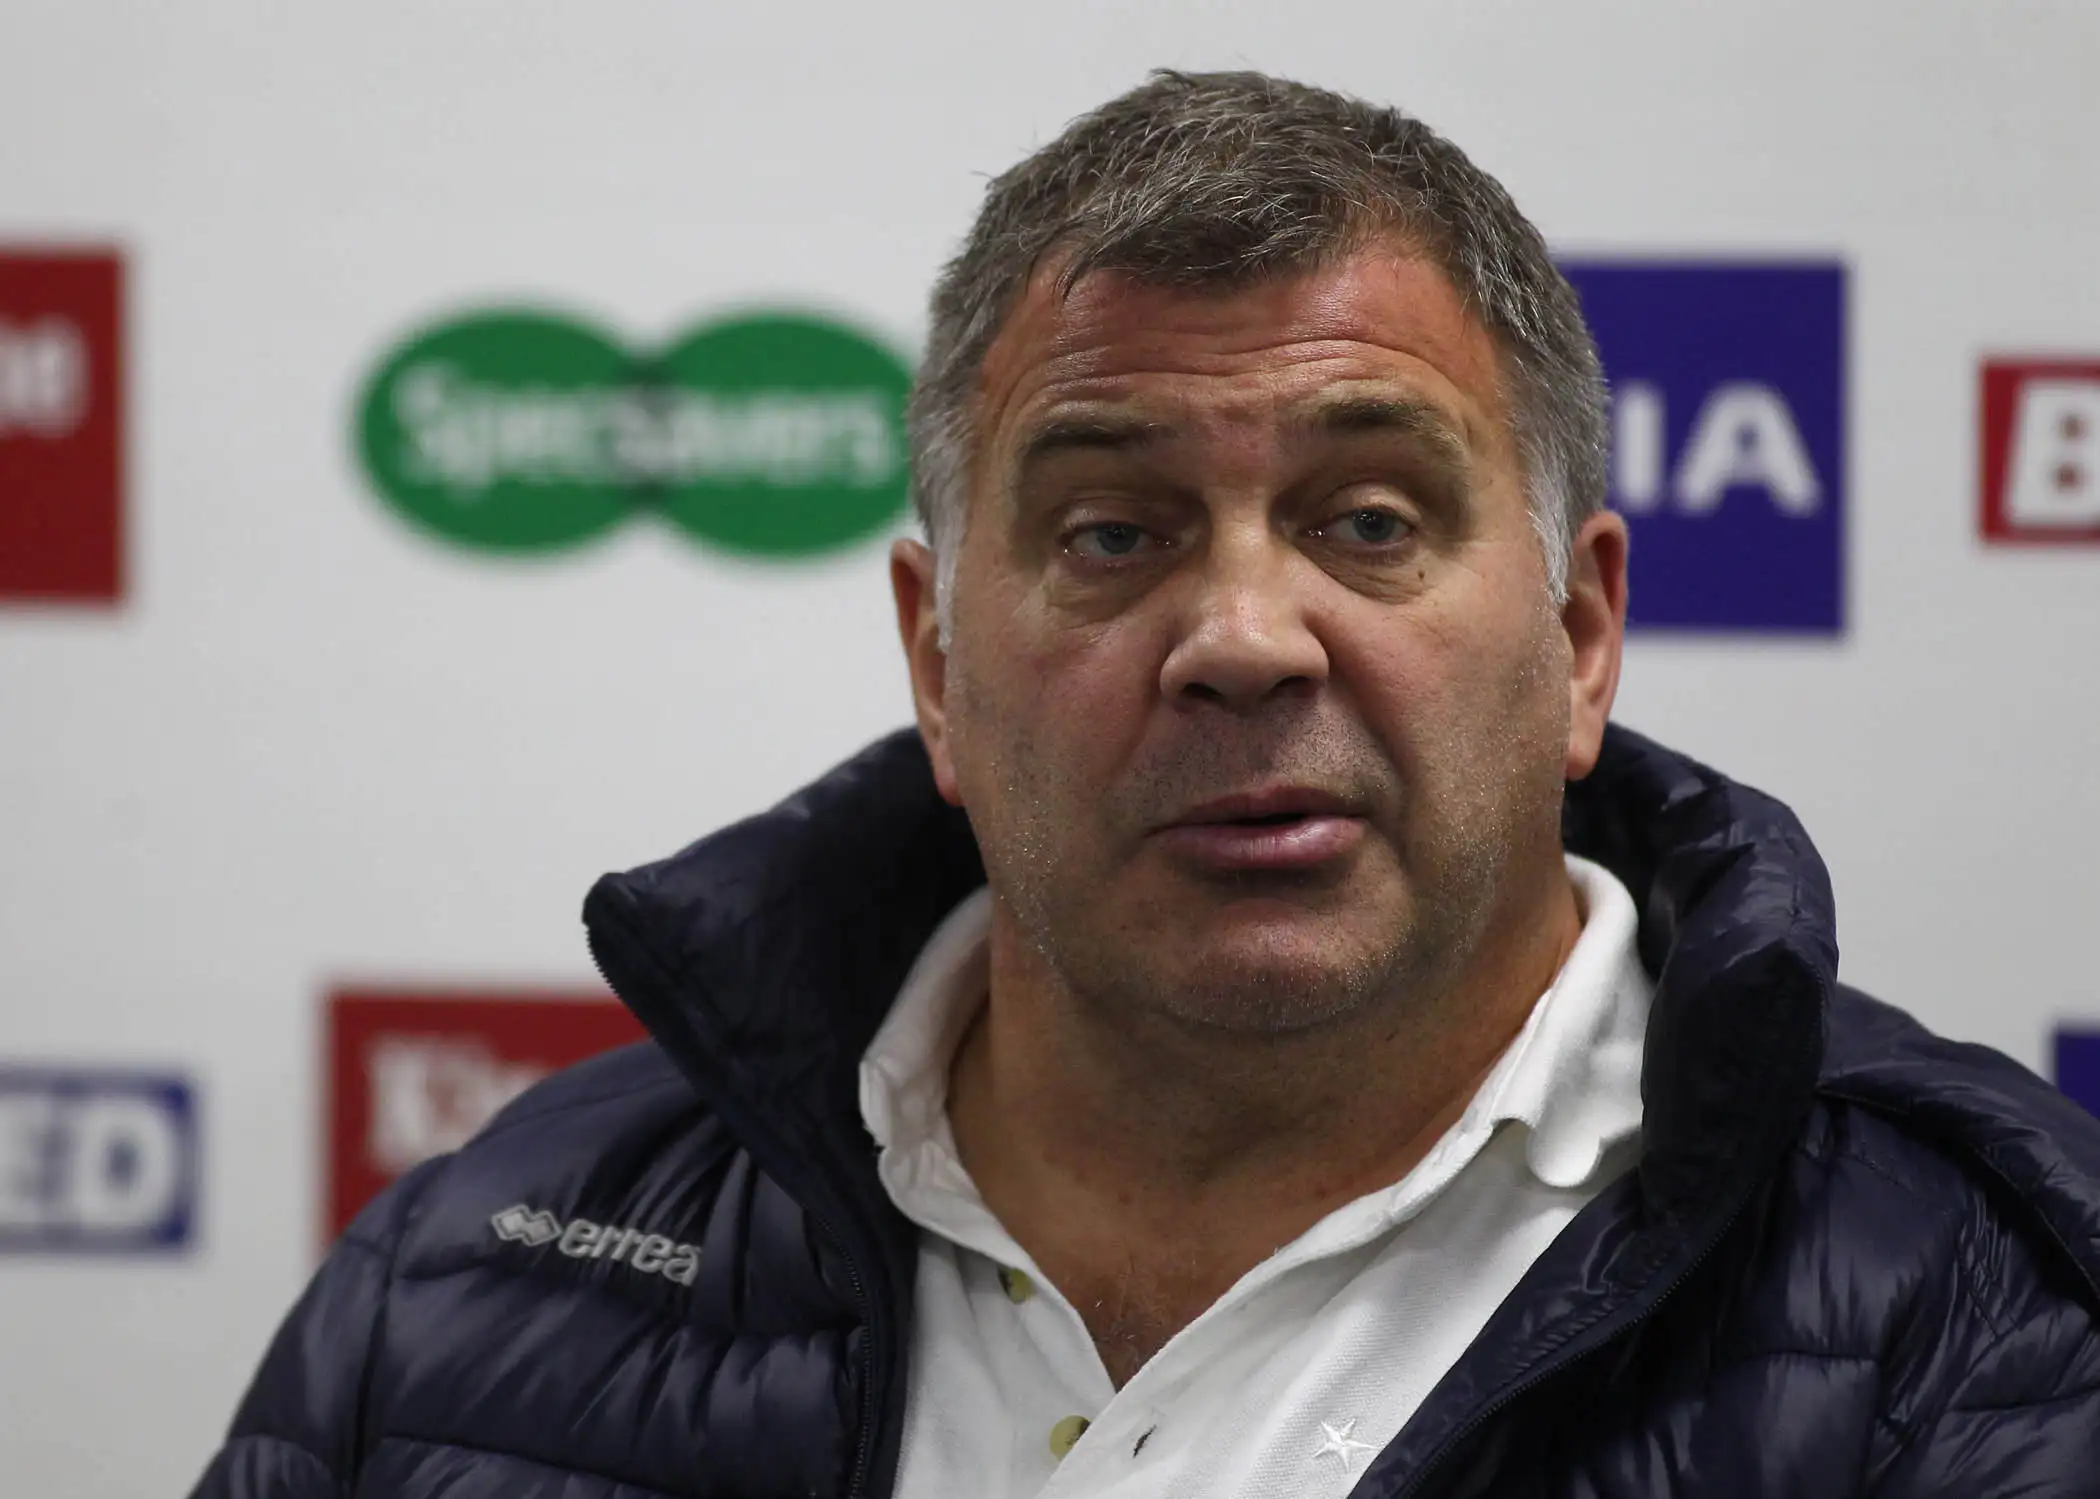 Wigan’s recent losses nothing to do with announcements, insists Shaun Wane